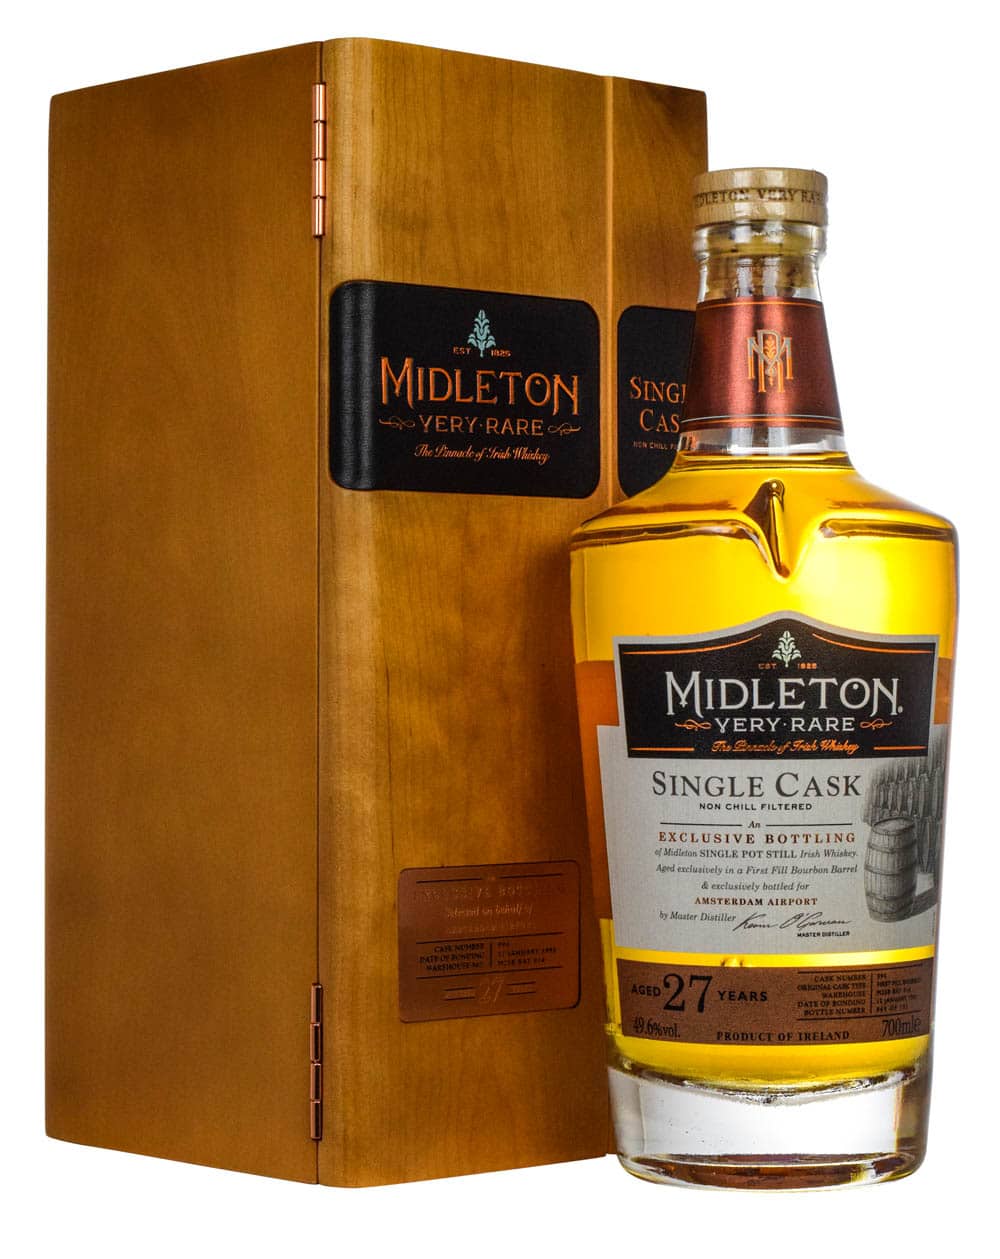 Midleton 27 Years Old Exclusive Bottling Bottled For Amsterdam Airport 1995 Box Must Have Malts